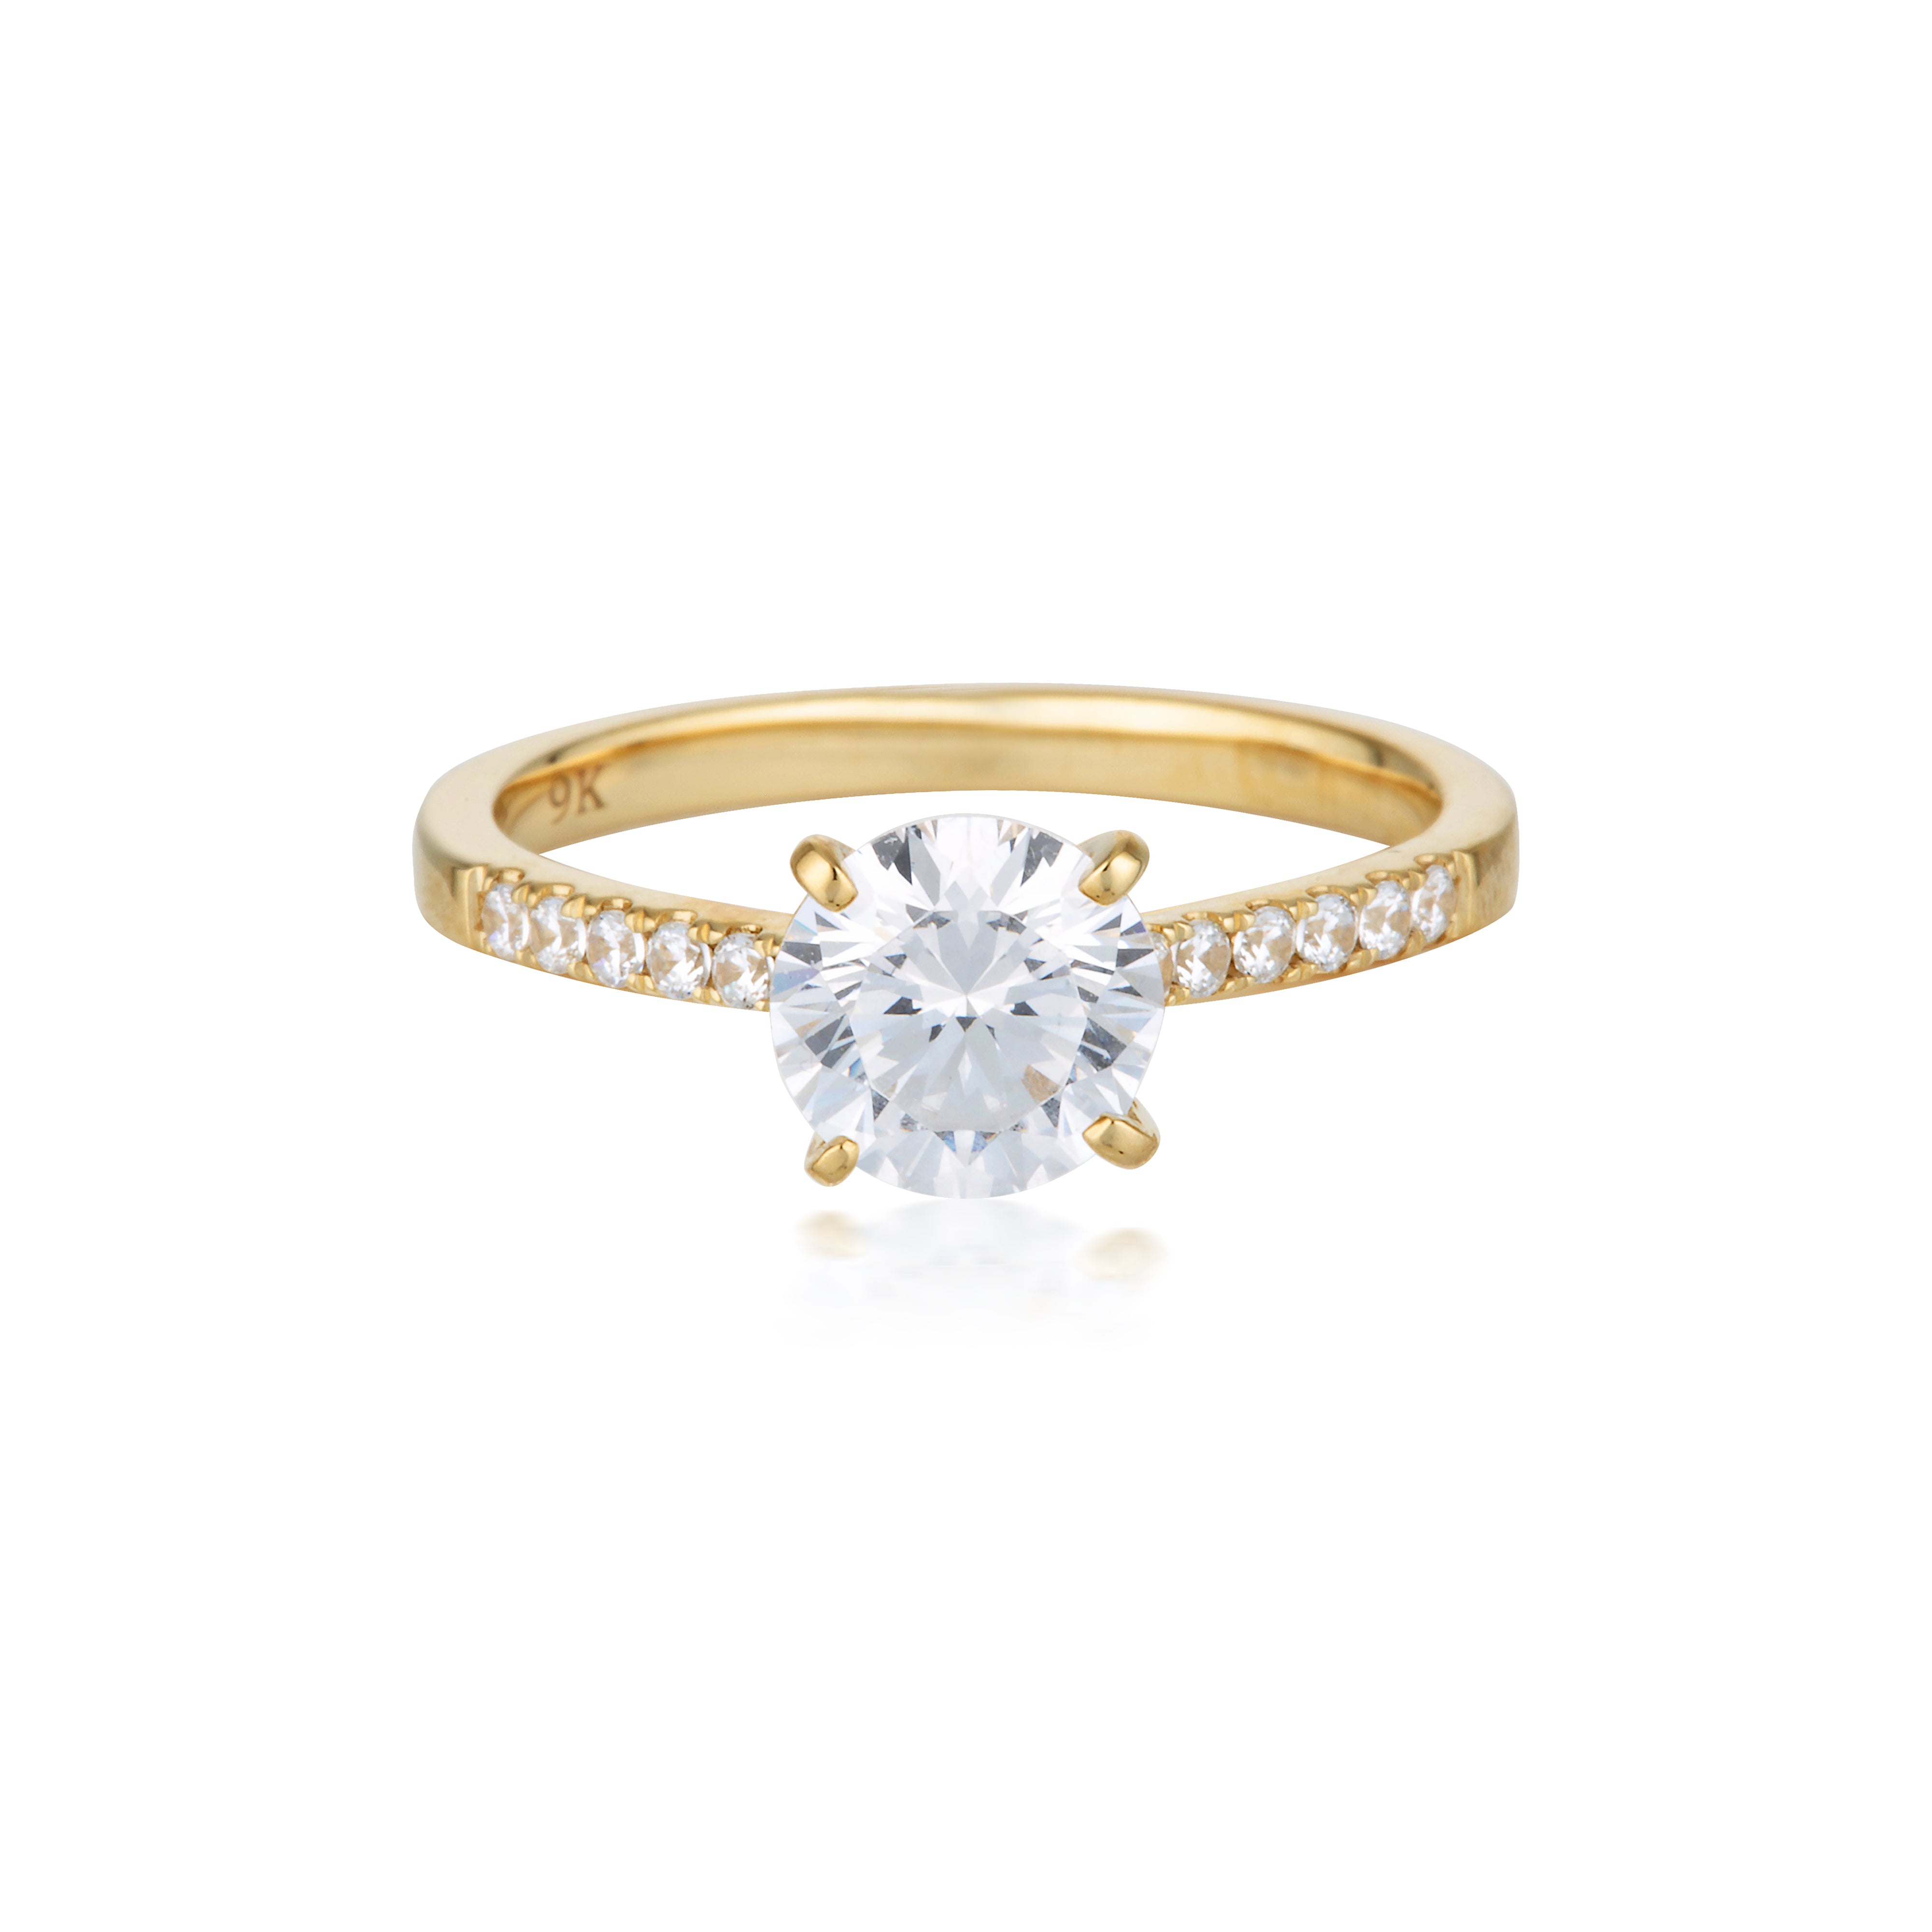 ROUND BRILLIANT CUT IN 1.25CTW MOISSANITE ENGAGEMENT RING IN 9CT YELLOW GOLD